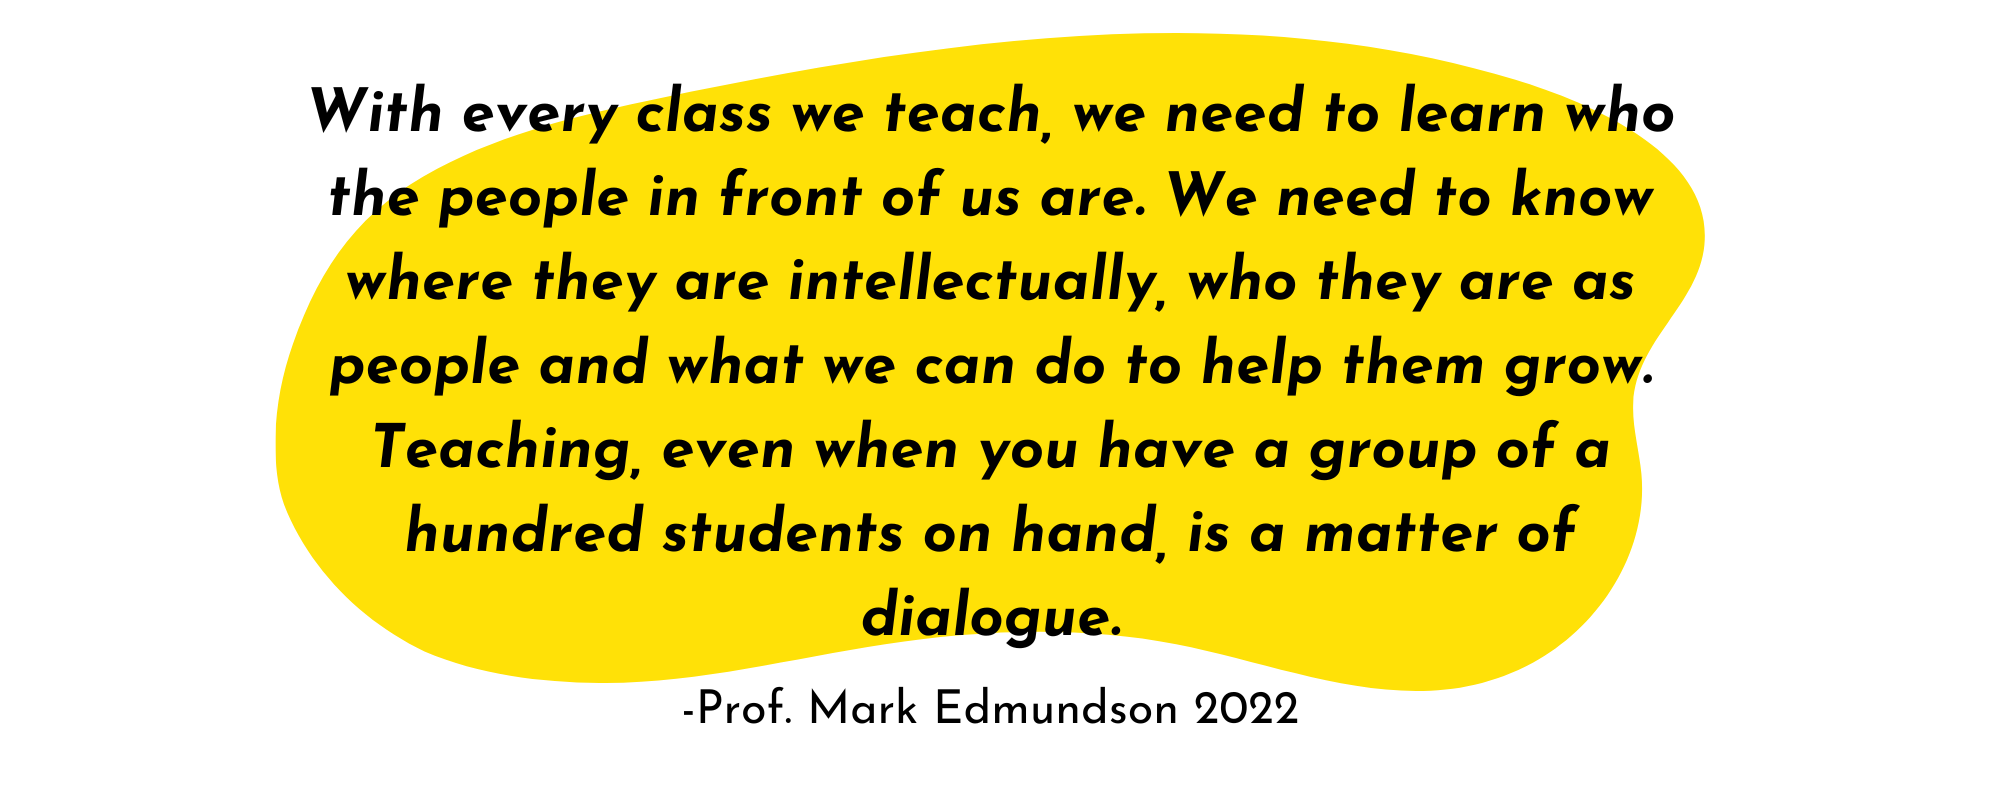 With every class we teach, we need to learn who the people in front of us are. We need to know where they are intellectual, who they are as people and what we can do to help them grow. Teaching, even when you have a group of a hundred students on hand, is a matter of dialogue.